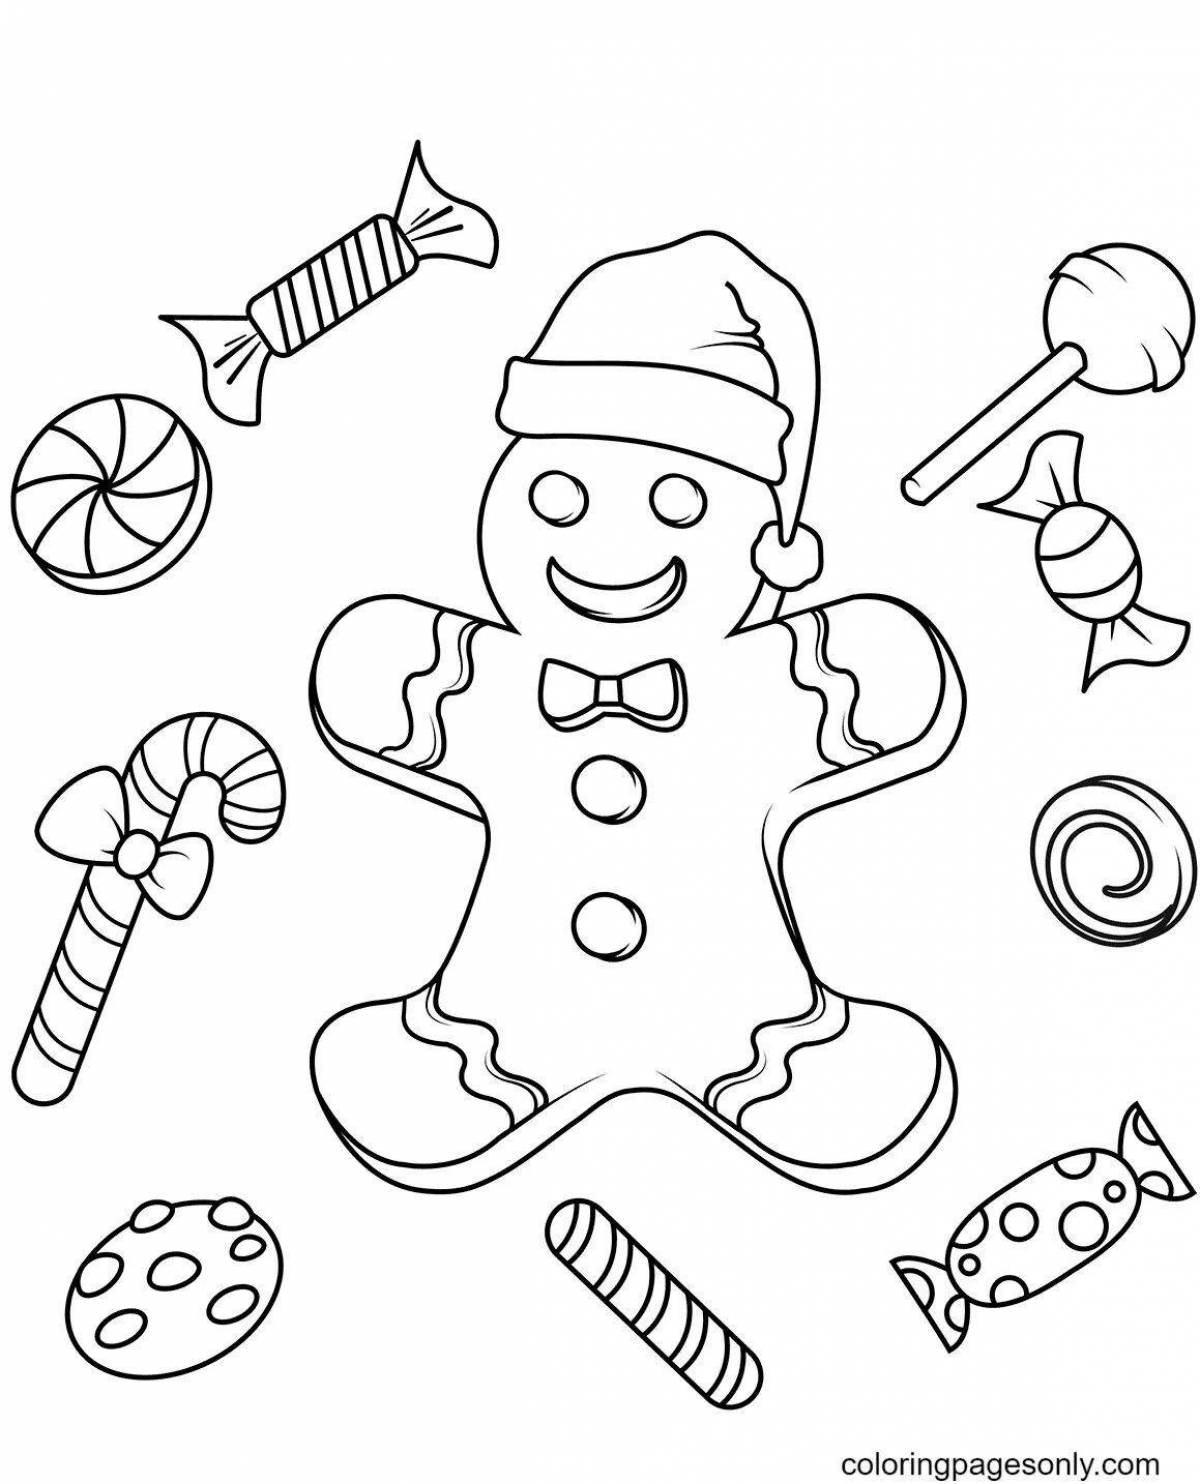 Coloring page of an attractive gingerbread man